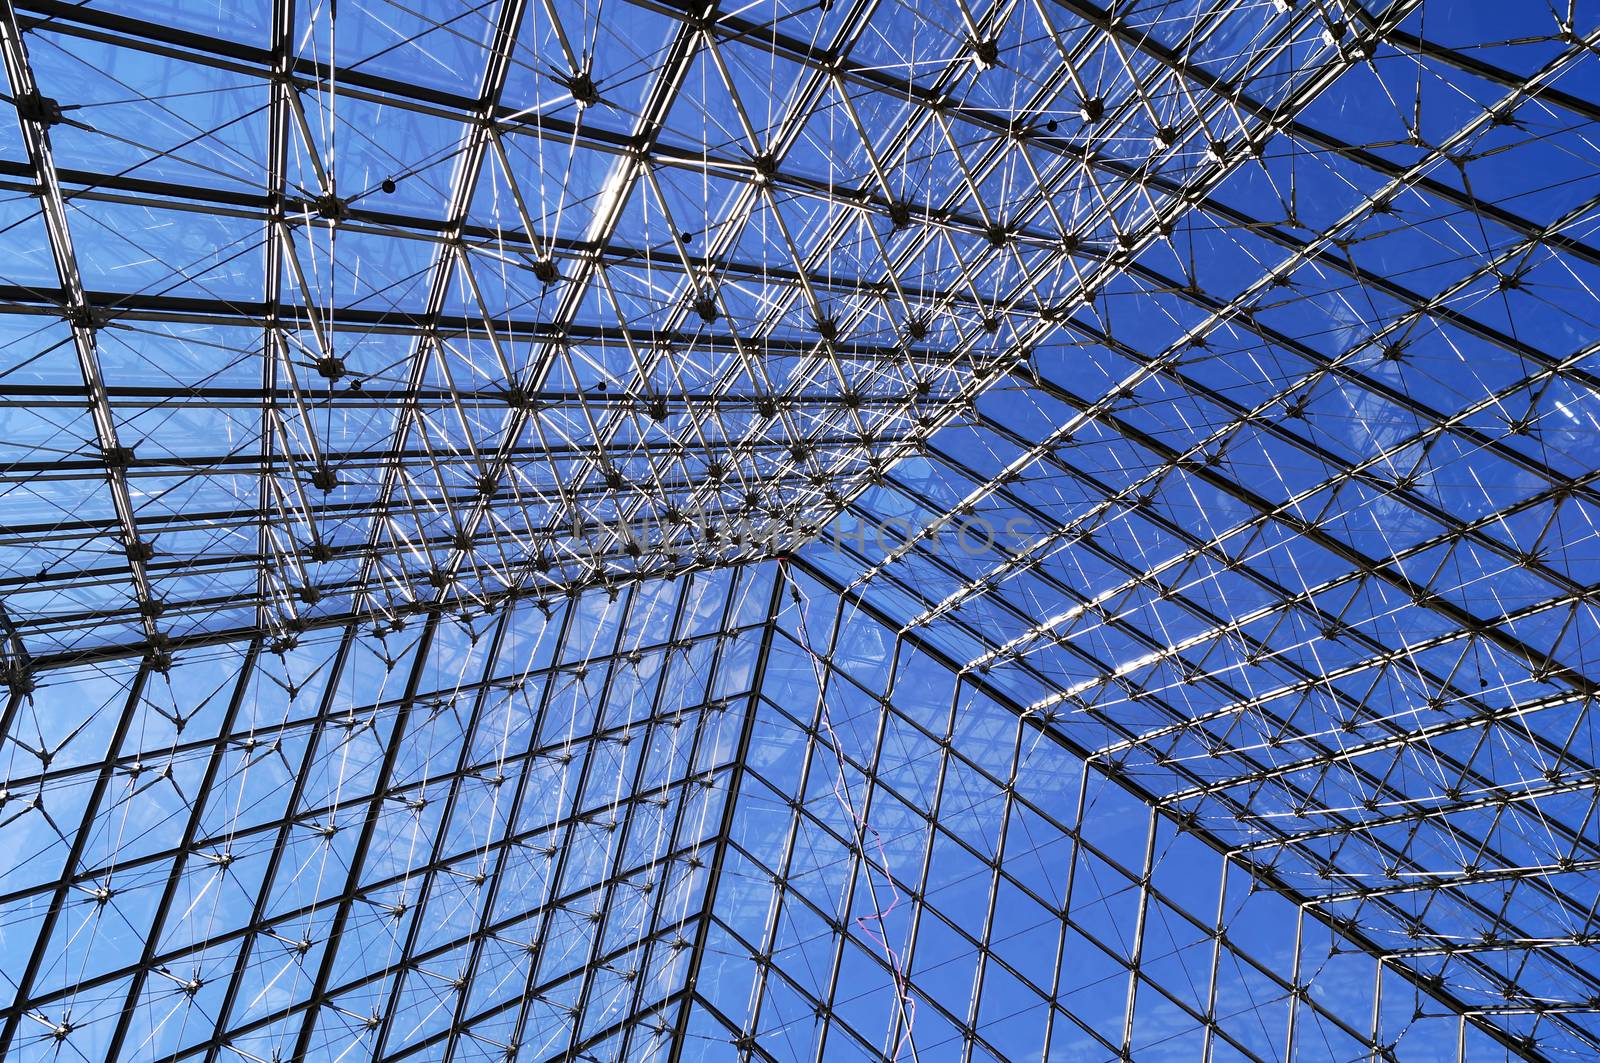 Glass pyramid at the Louvre by magraphics